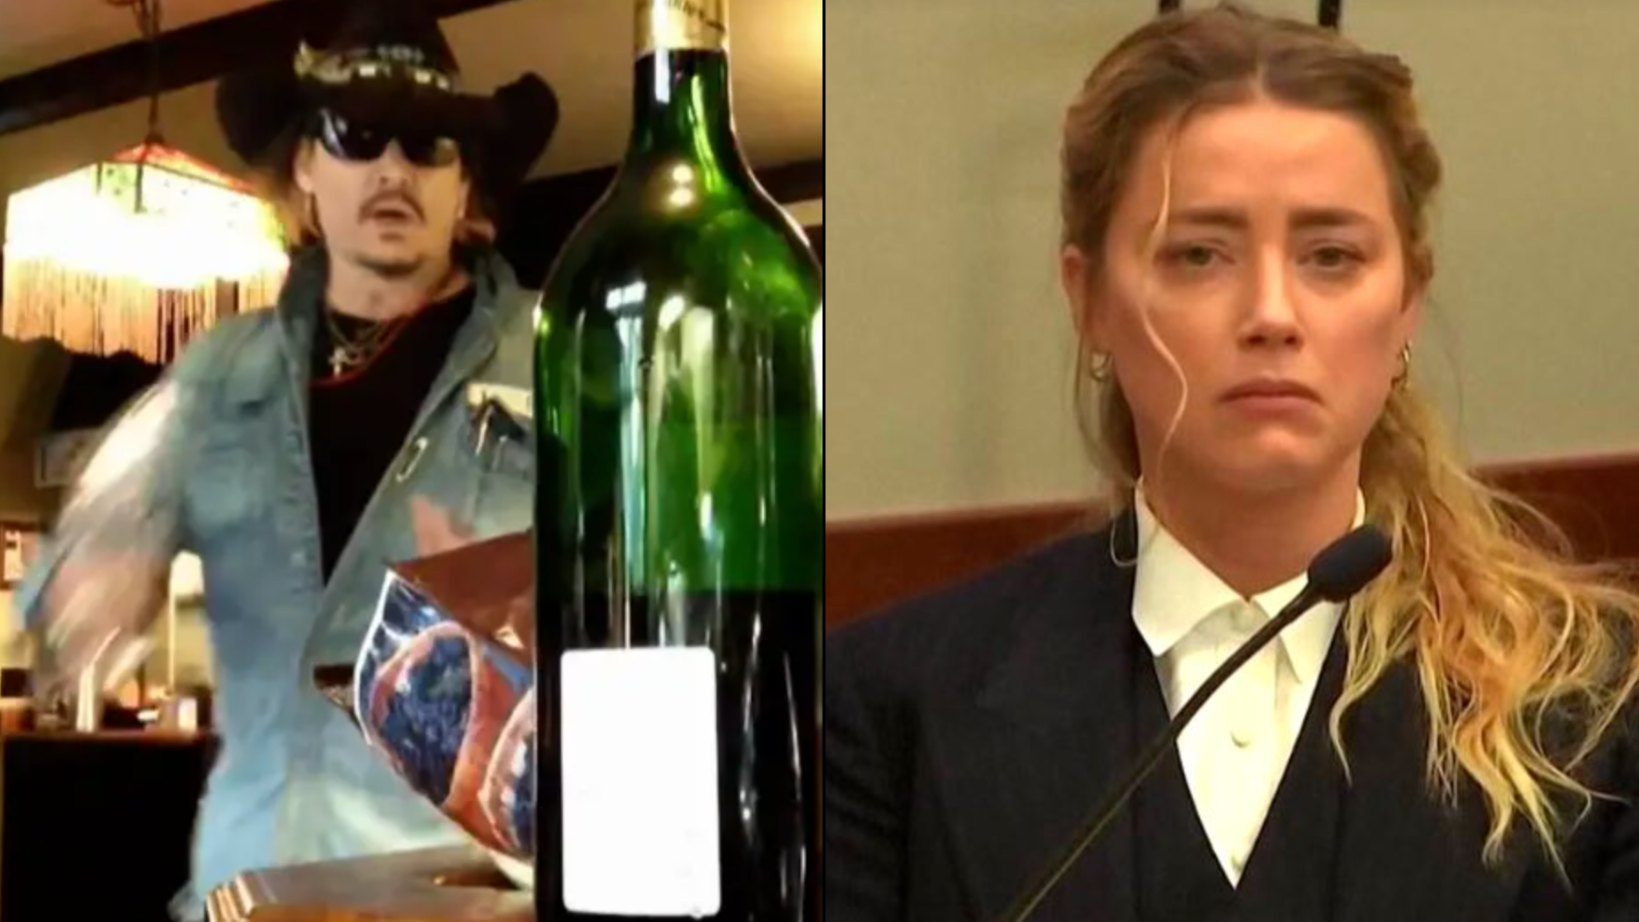 Mega Pint Wine Chiller Copper Vacuum Insulated Cup Johnny Depp Amber Heard